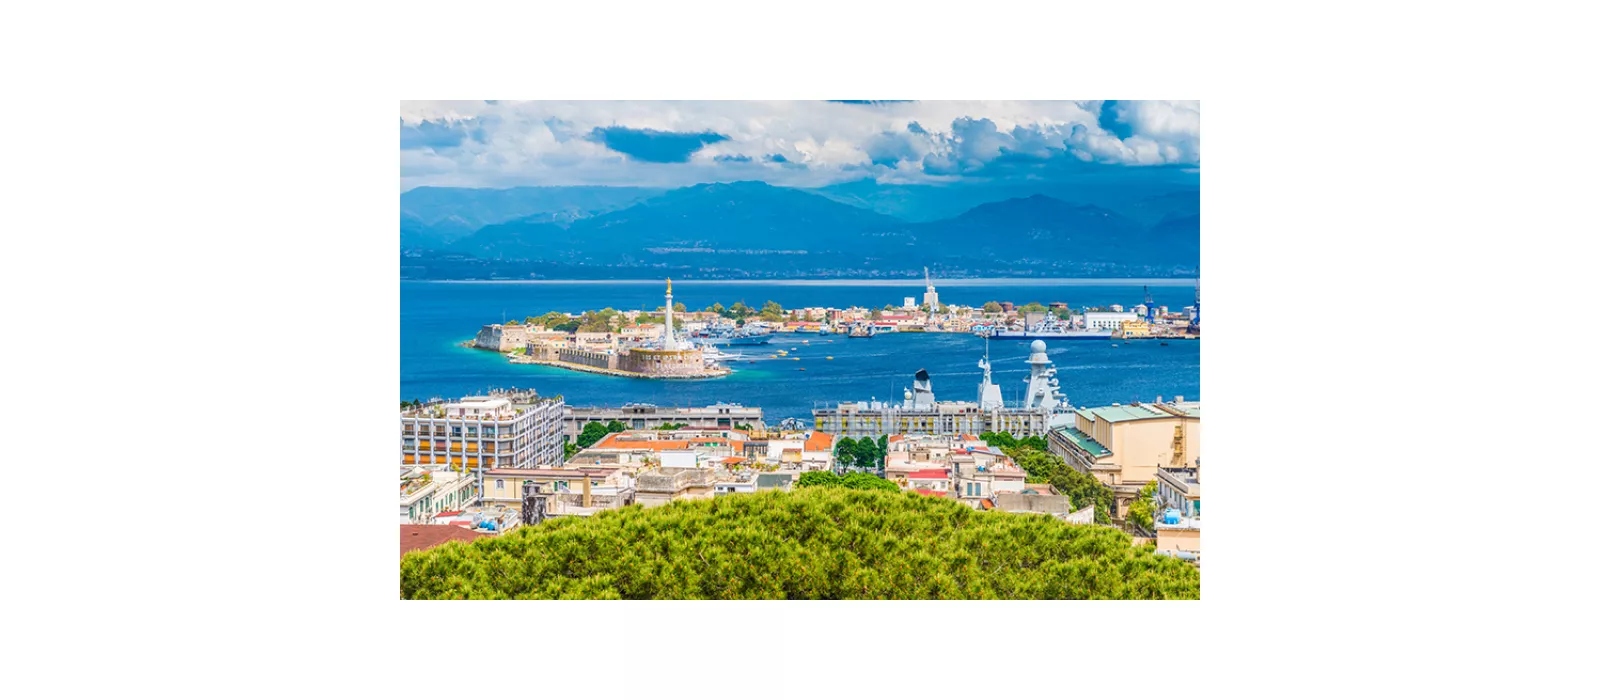 From Palermo to Messina by sea, sailing along the Route of the Volcanoes